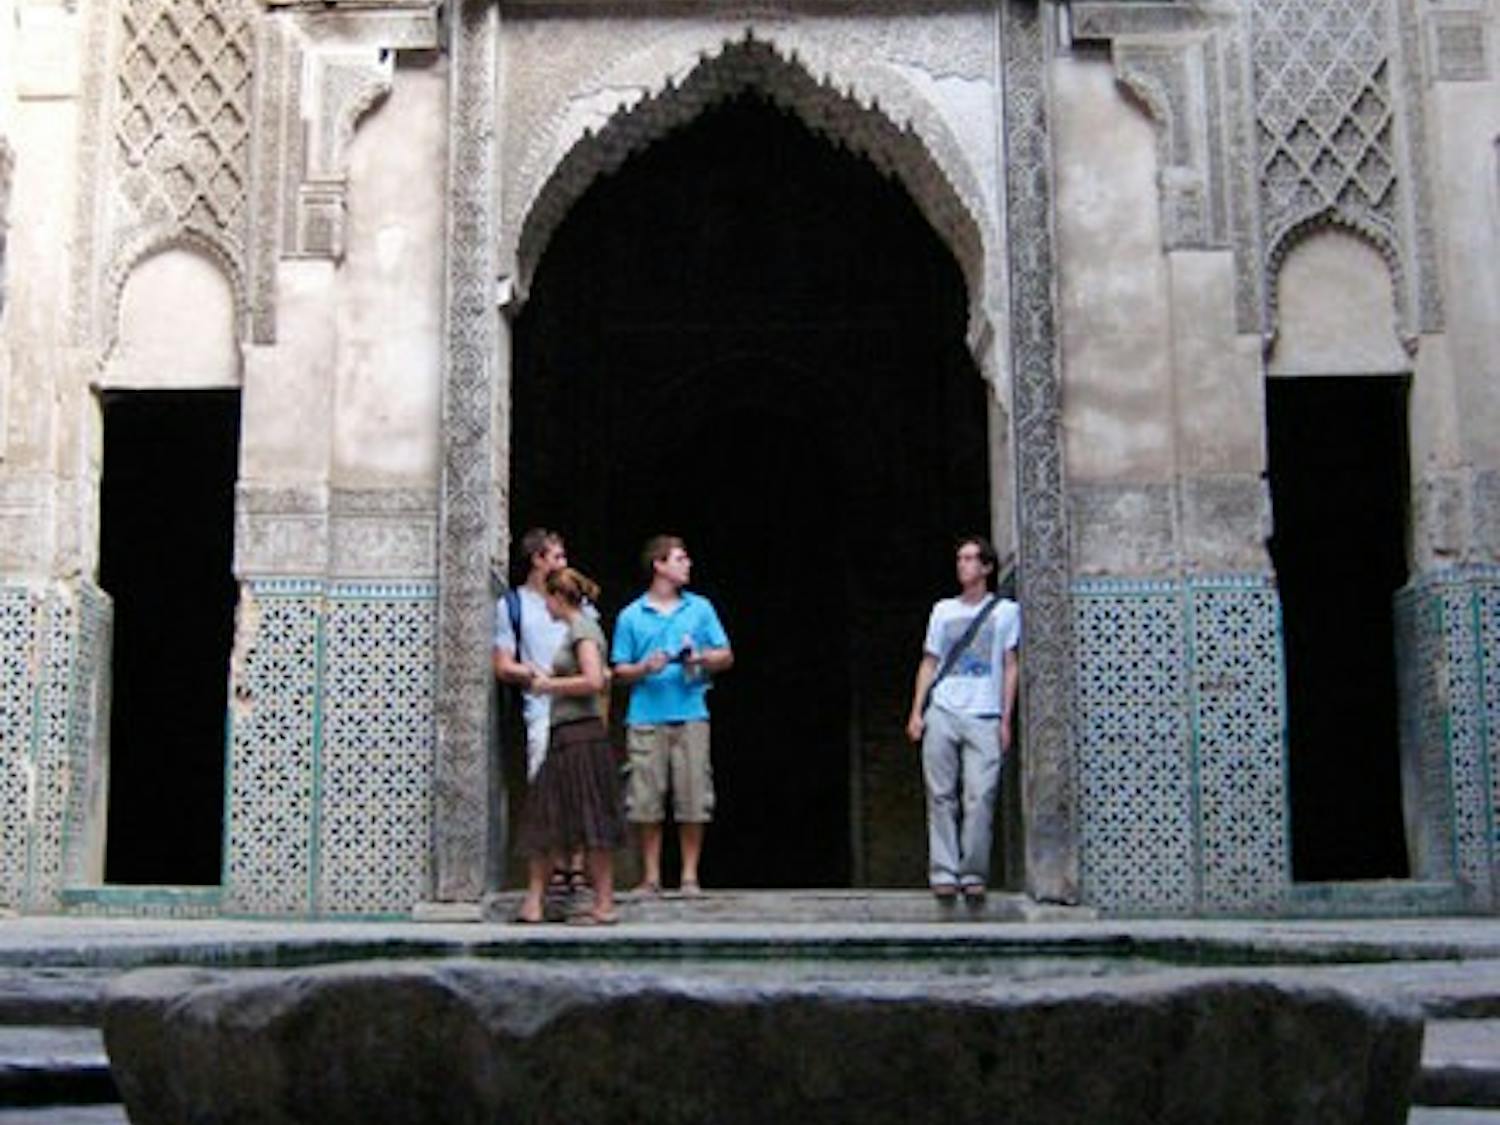 Evan Greulich, Kate Bowman, Phil Aubart and William Blakeley, all members of the Class of 2010, relax in Fez, Morocco, during the summer 2007 Arabic LSA-plus.